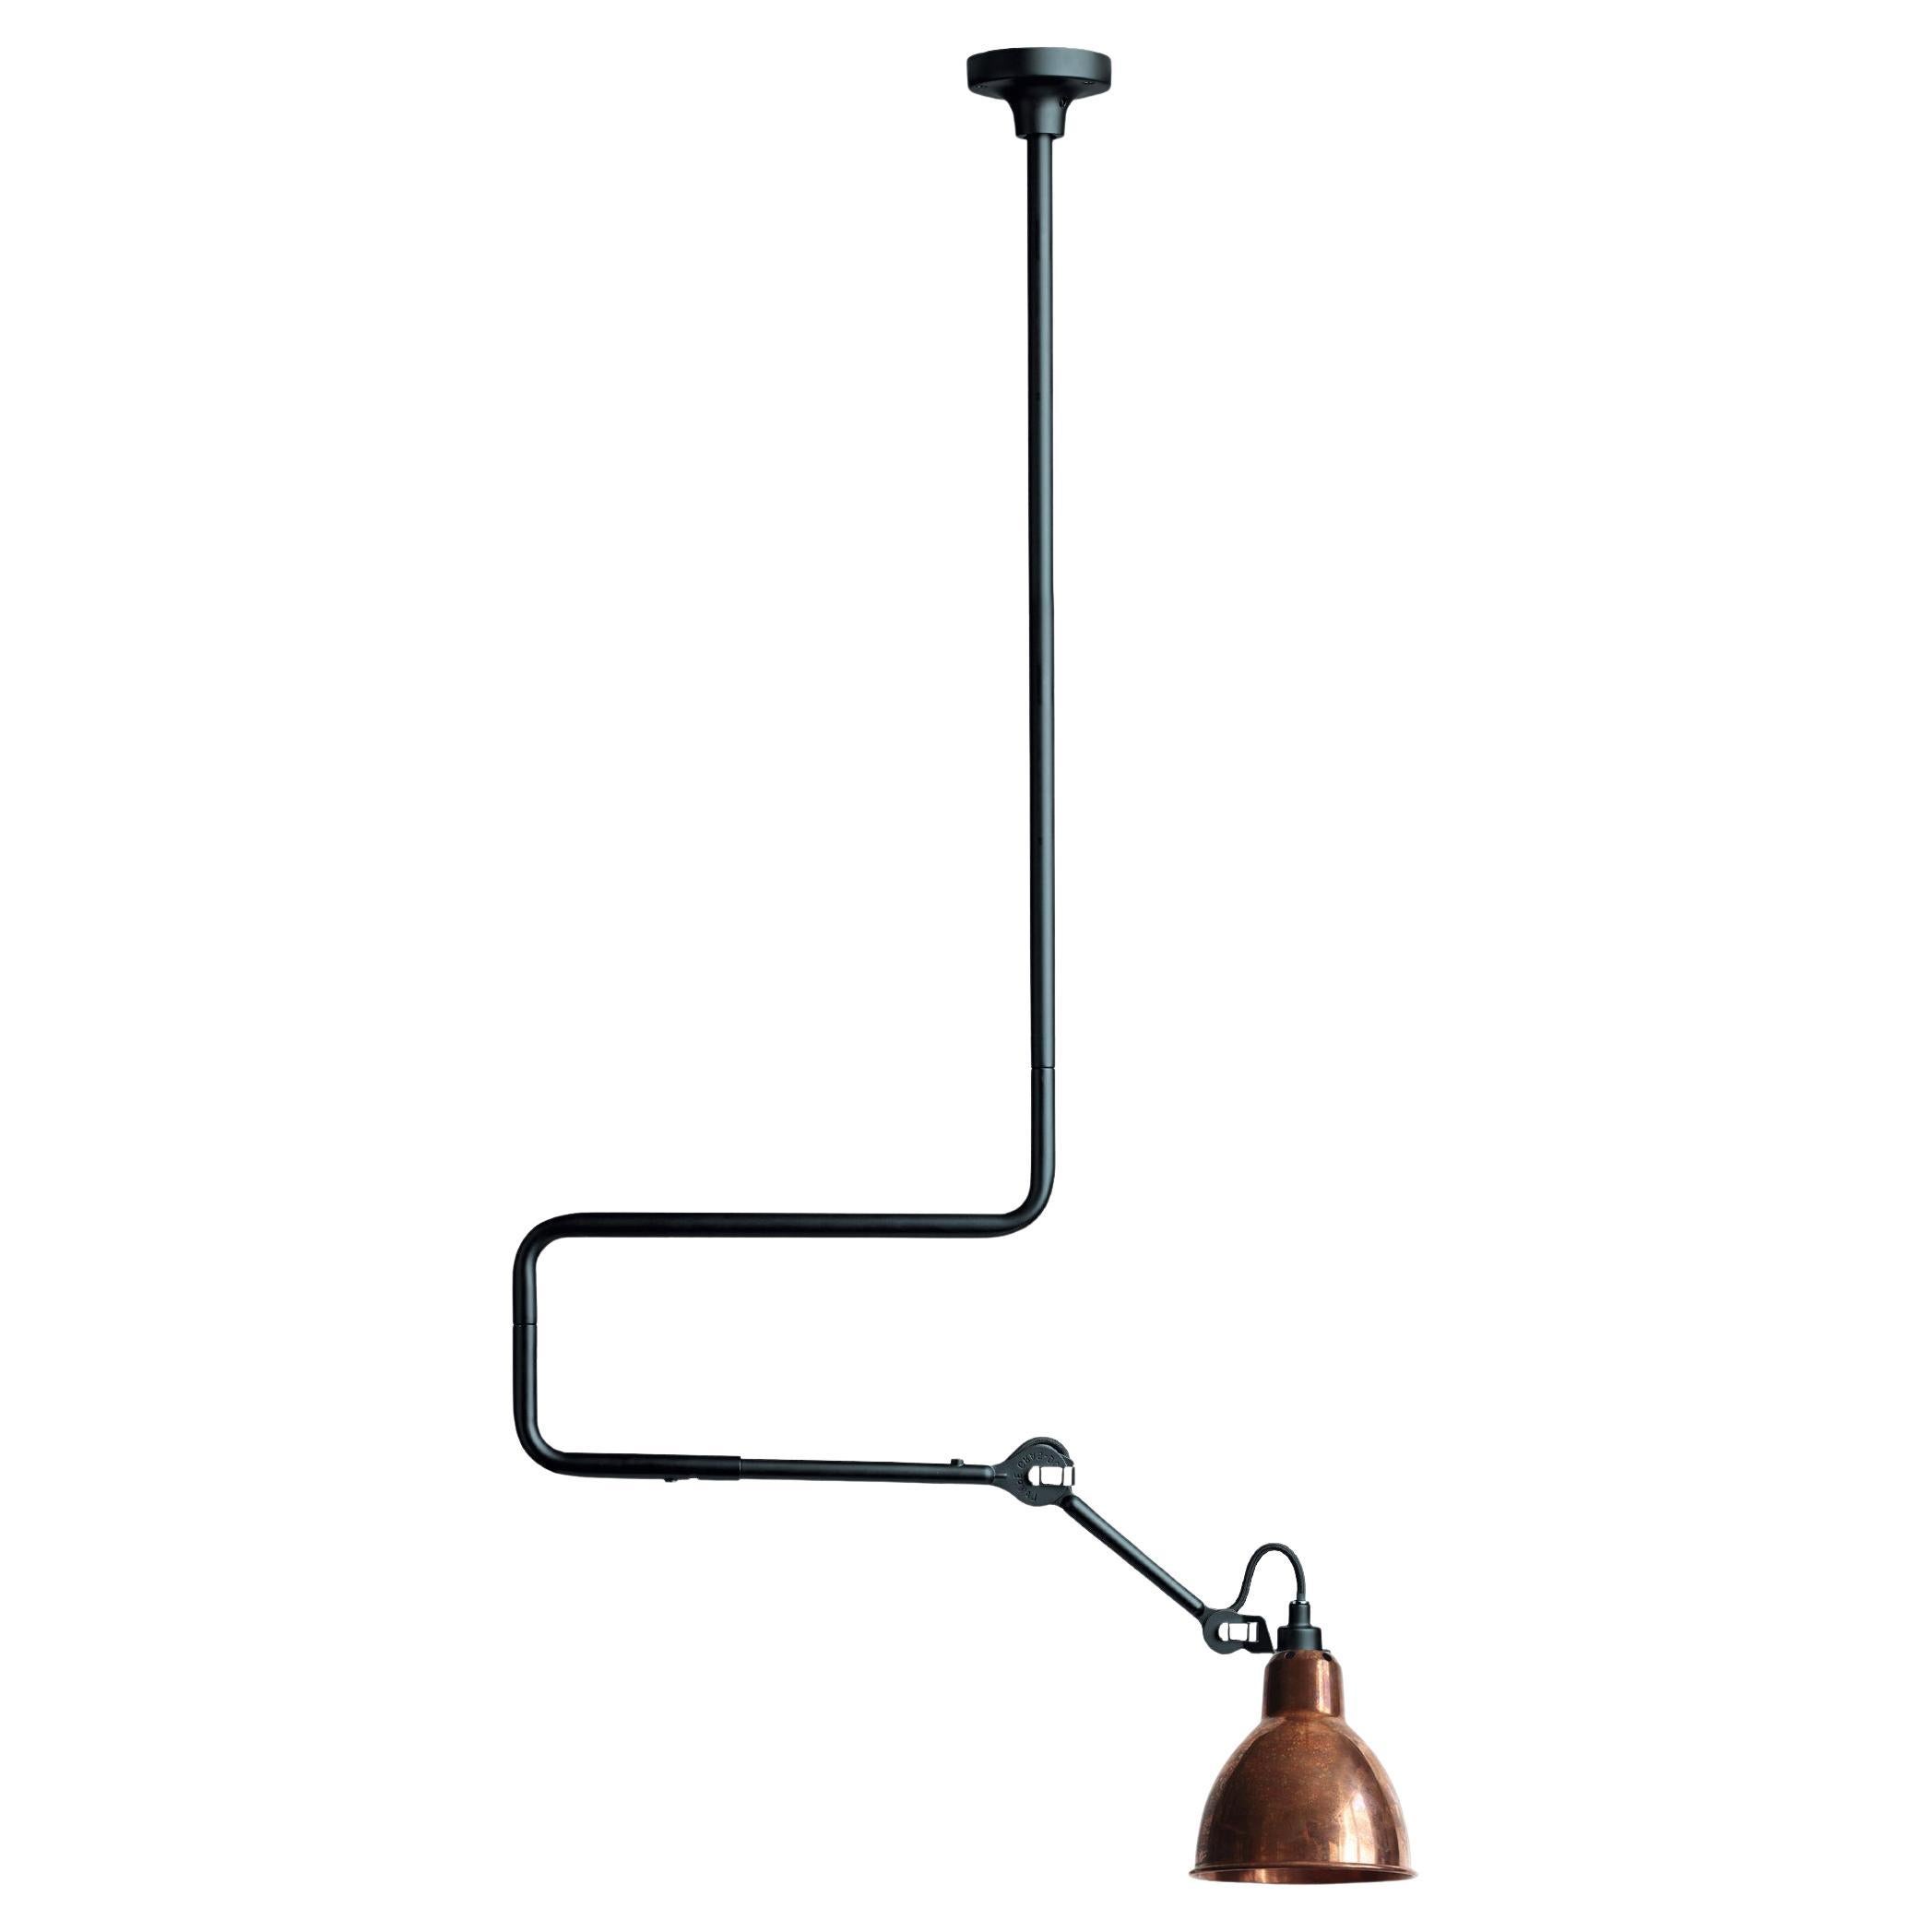 DCW Editions La Lampe Gras N°312 Pendant Lamp w/Extension in Raw Copper Shade For Sale